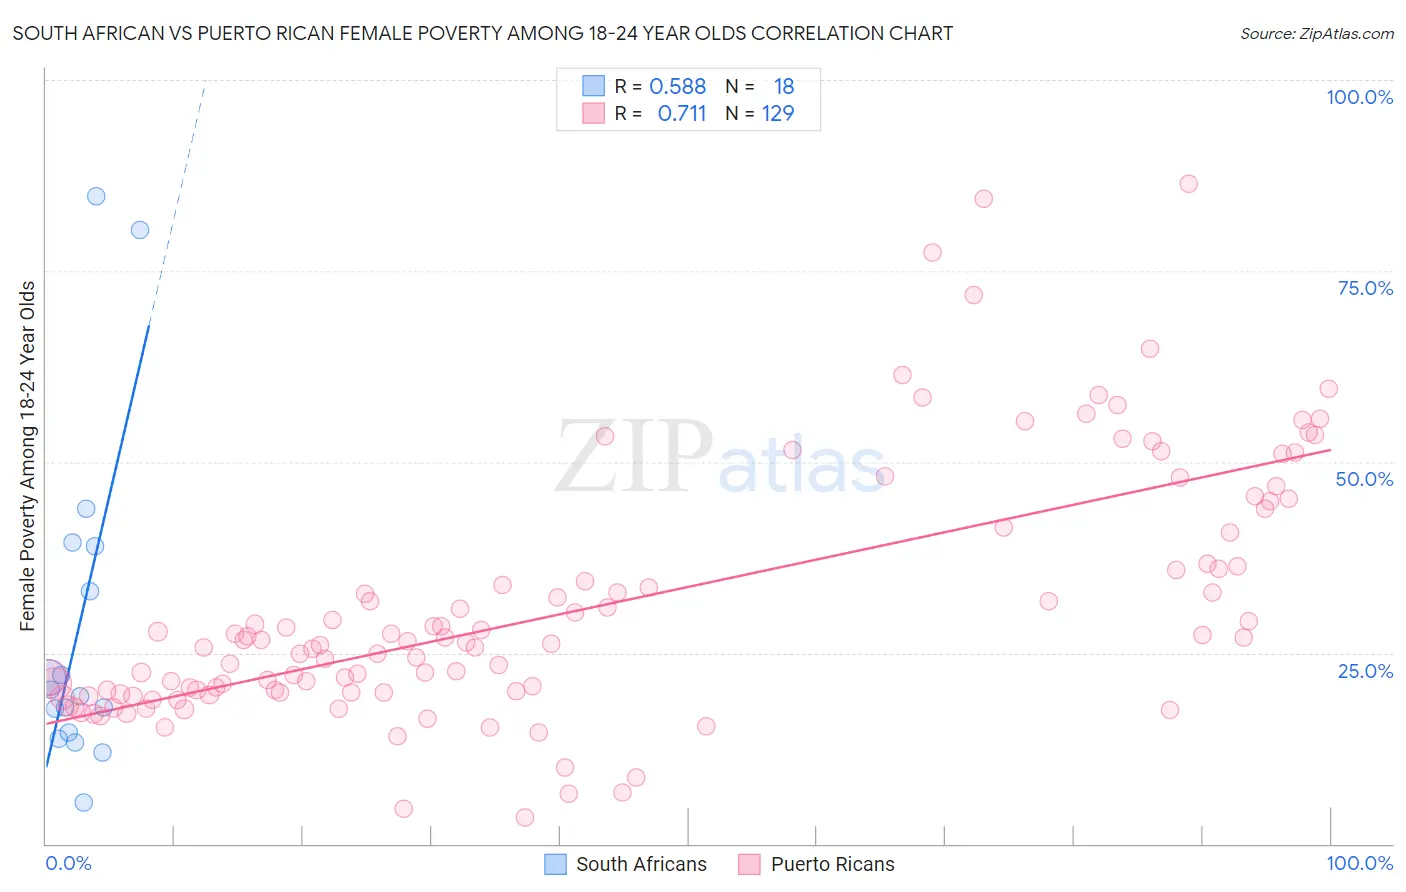 South African vs Puerto Rican Female Poverty Among 18-24 Year Olds